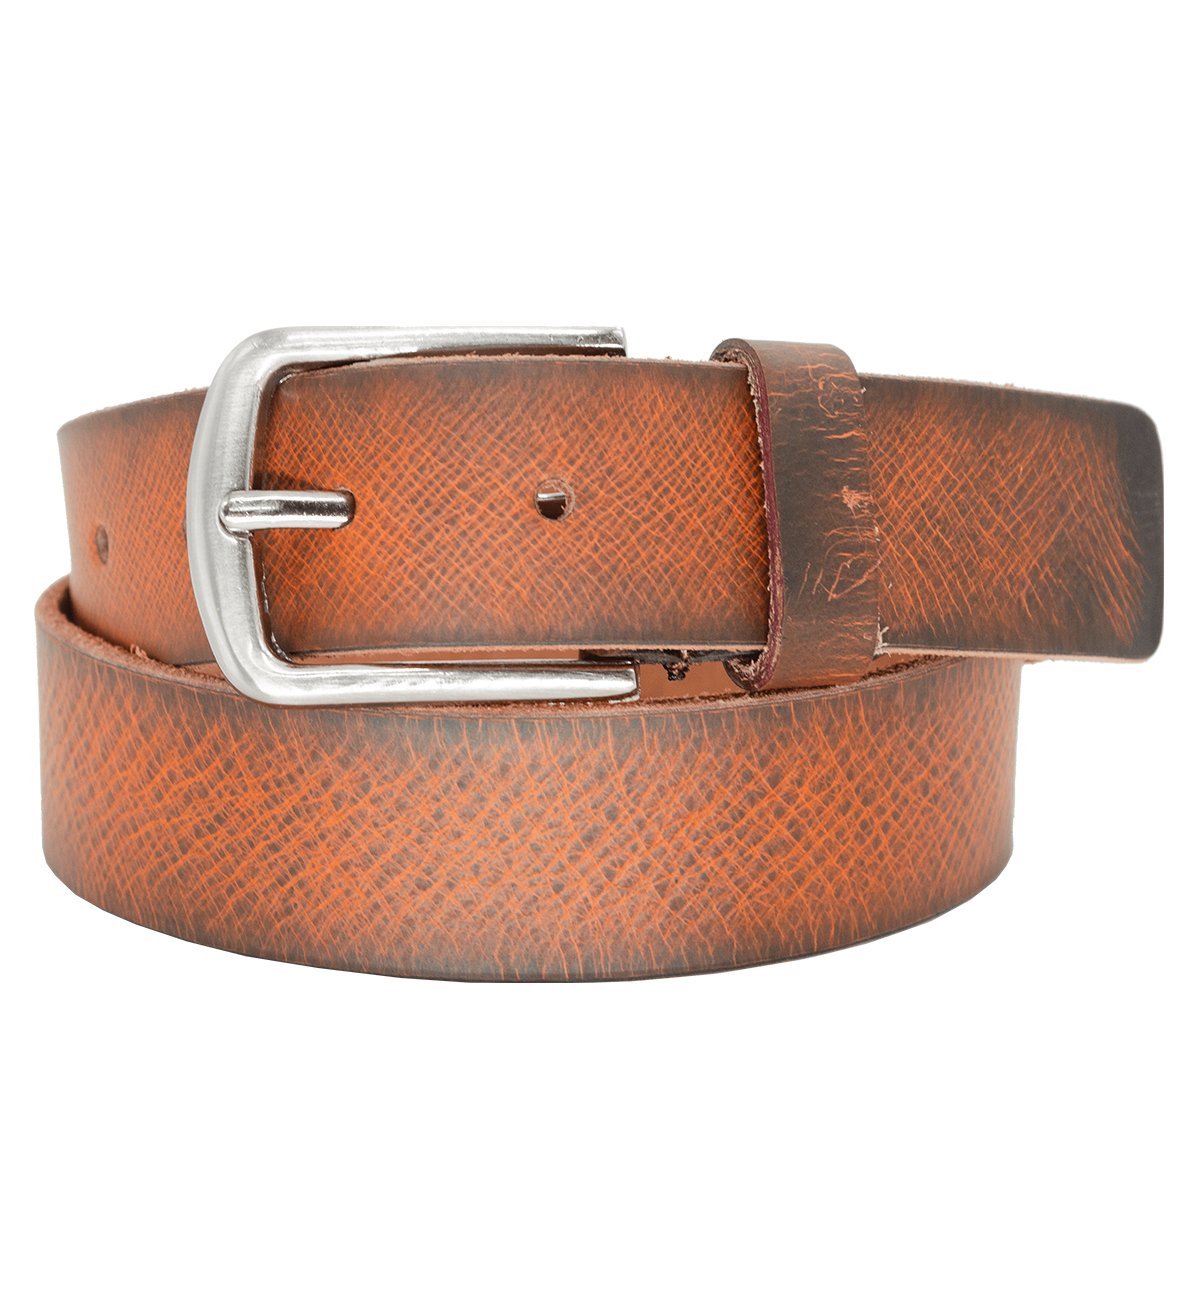 Men's Double Tone Genuine Leather Belt with Heavy Silver Buckle - #BT-1531